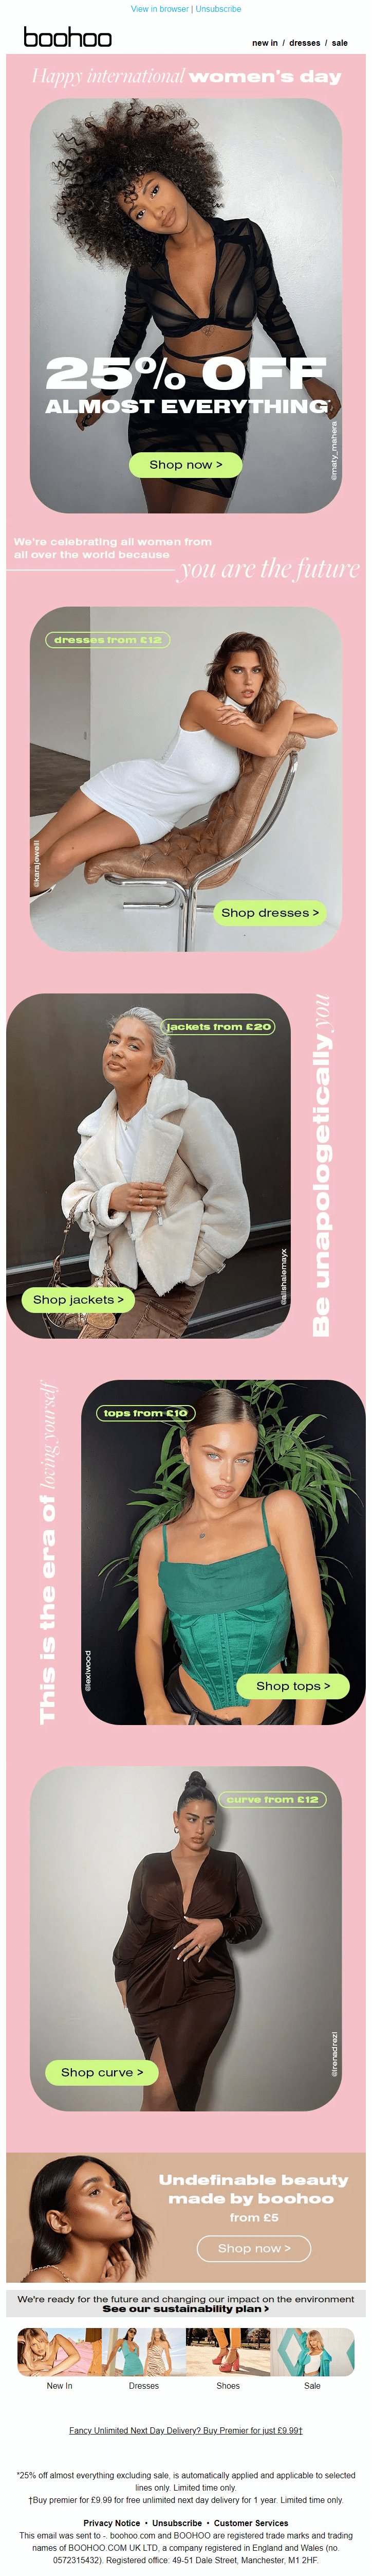 Boohoo- Women's Day email